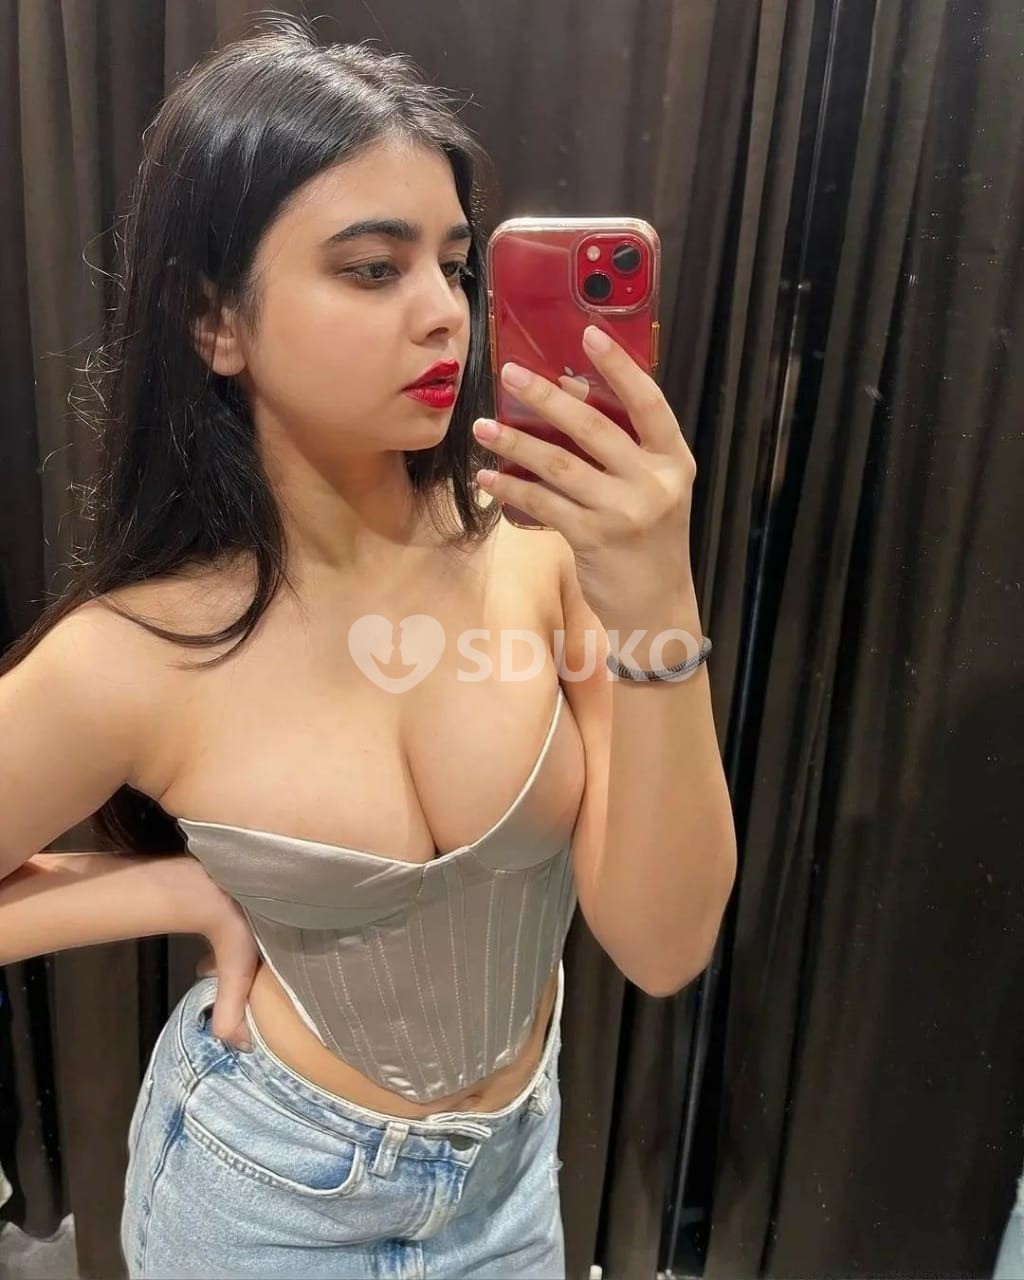 PUNE ALL AREA VIP TODAY LOW+( PRICE ESCORT 🥰SERVICE 100% SAFE AND SECURE ANYTIME CALL ME 24 X 7 SERVICE AVAILABLE 100